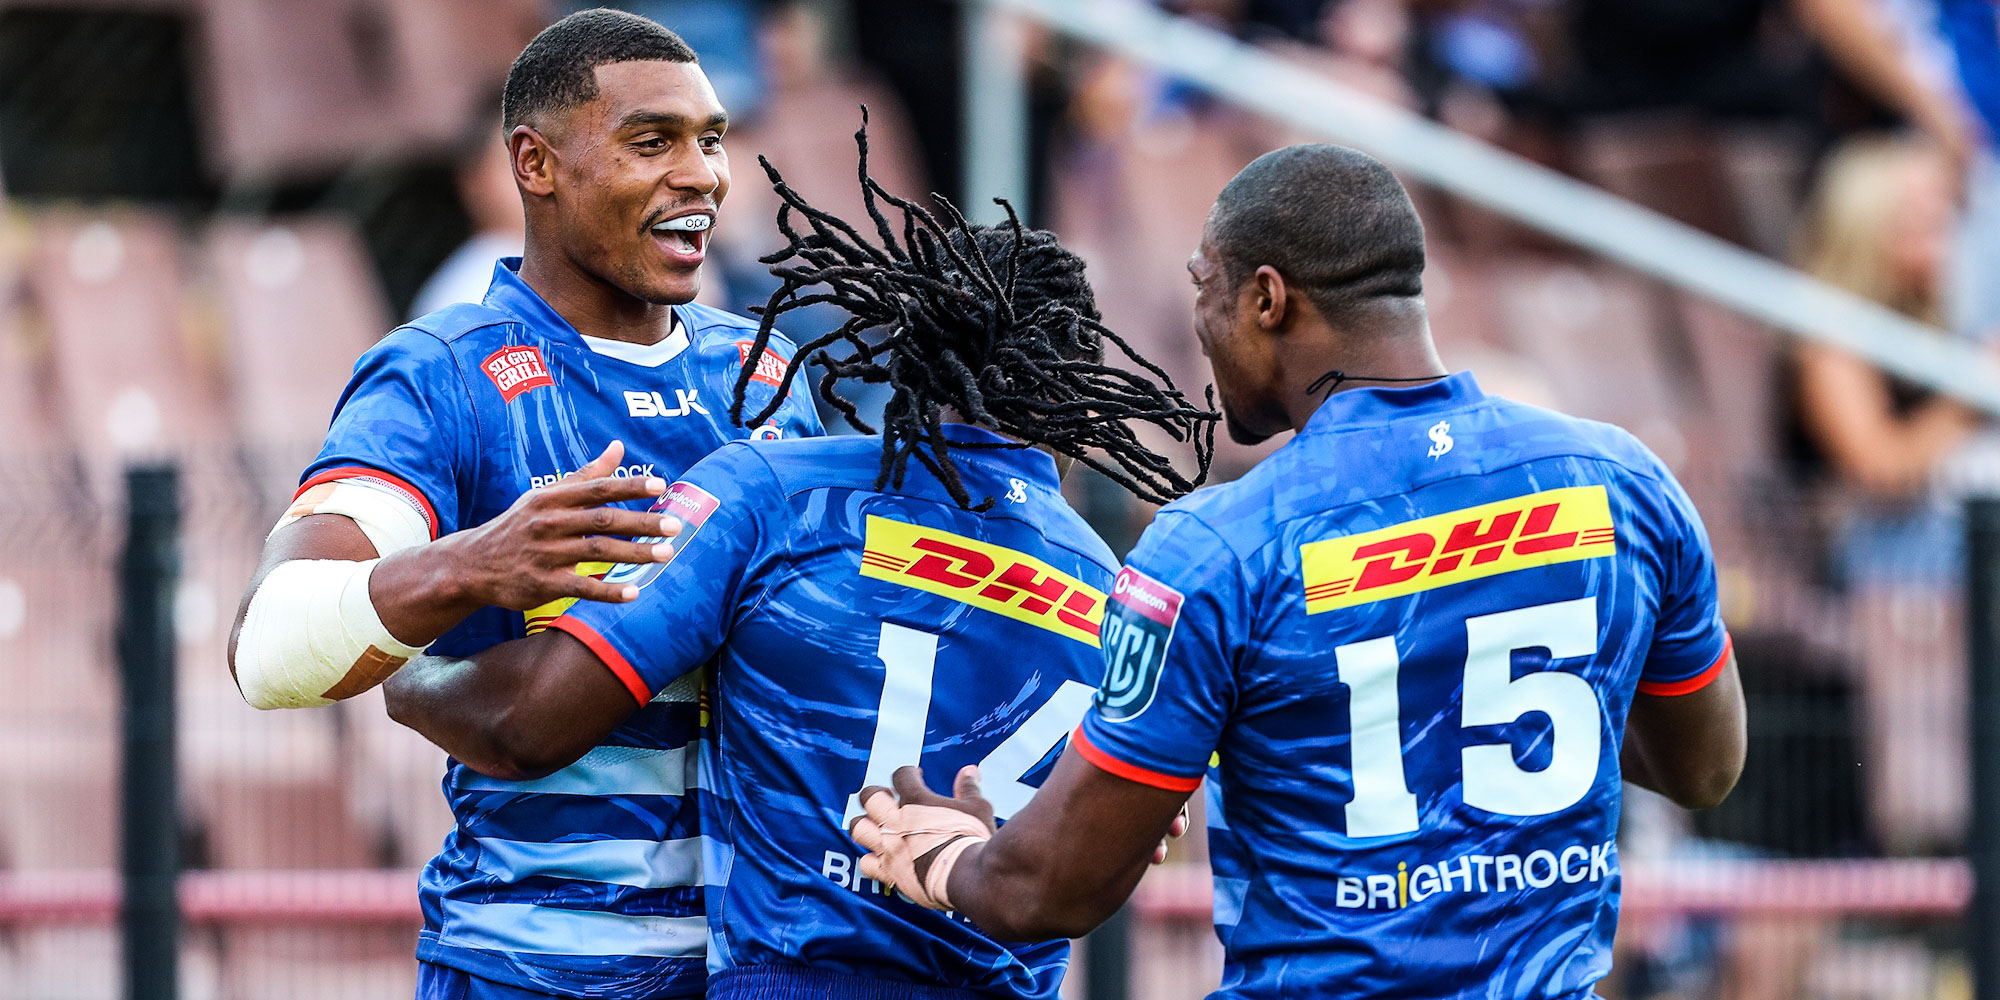 Damian Willemse celebrates scoring a superb try in his 50th DHL Stormers appearance.